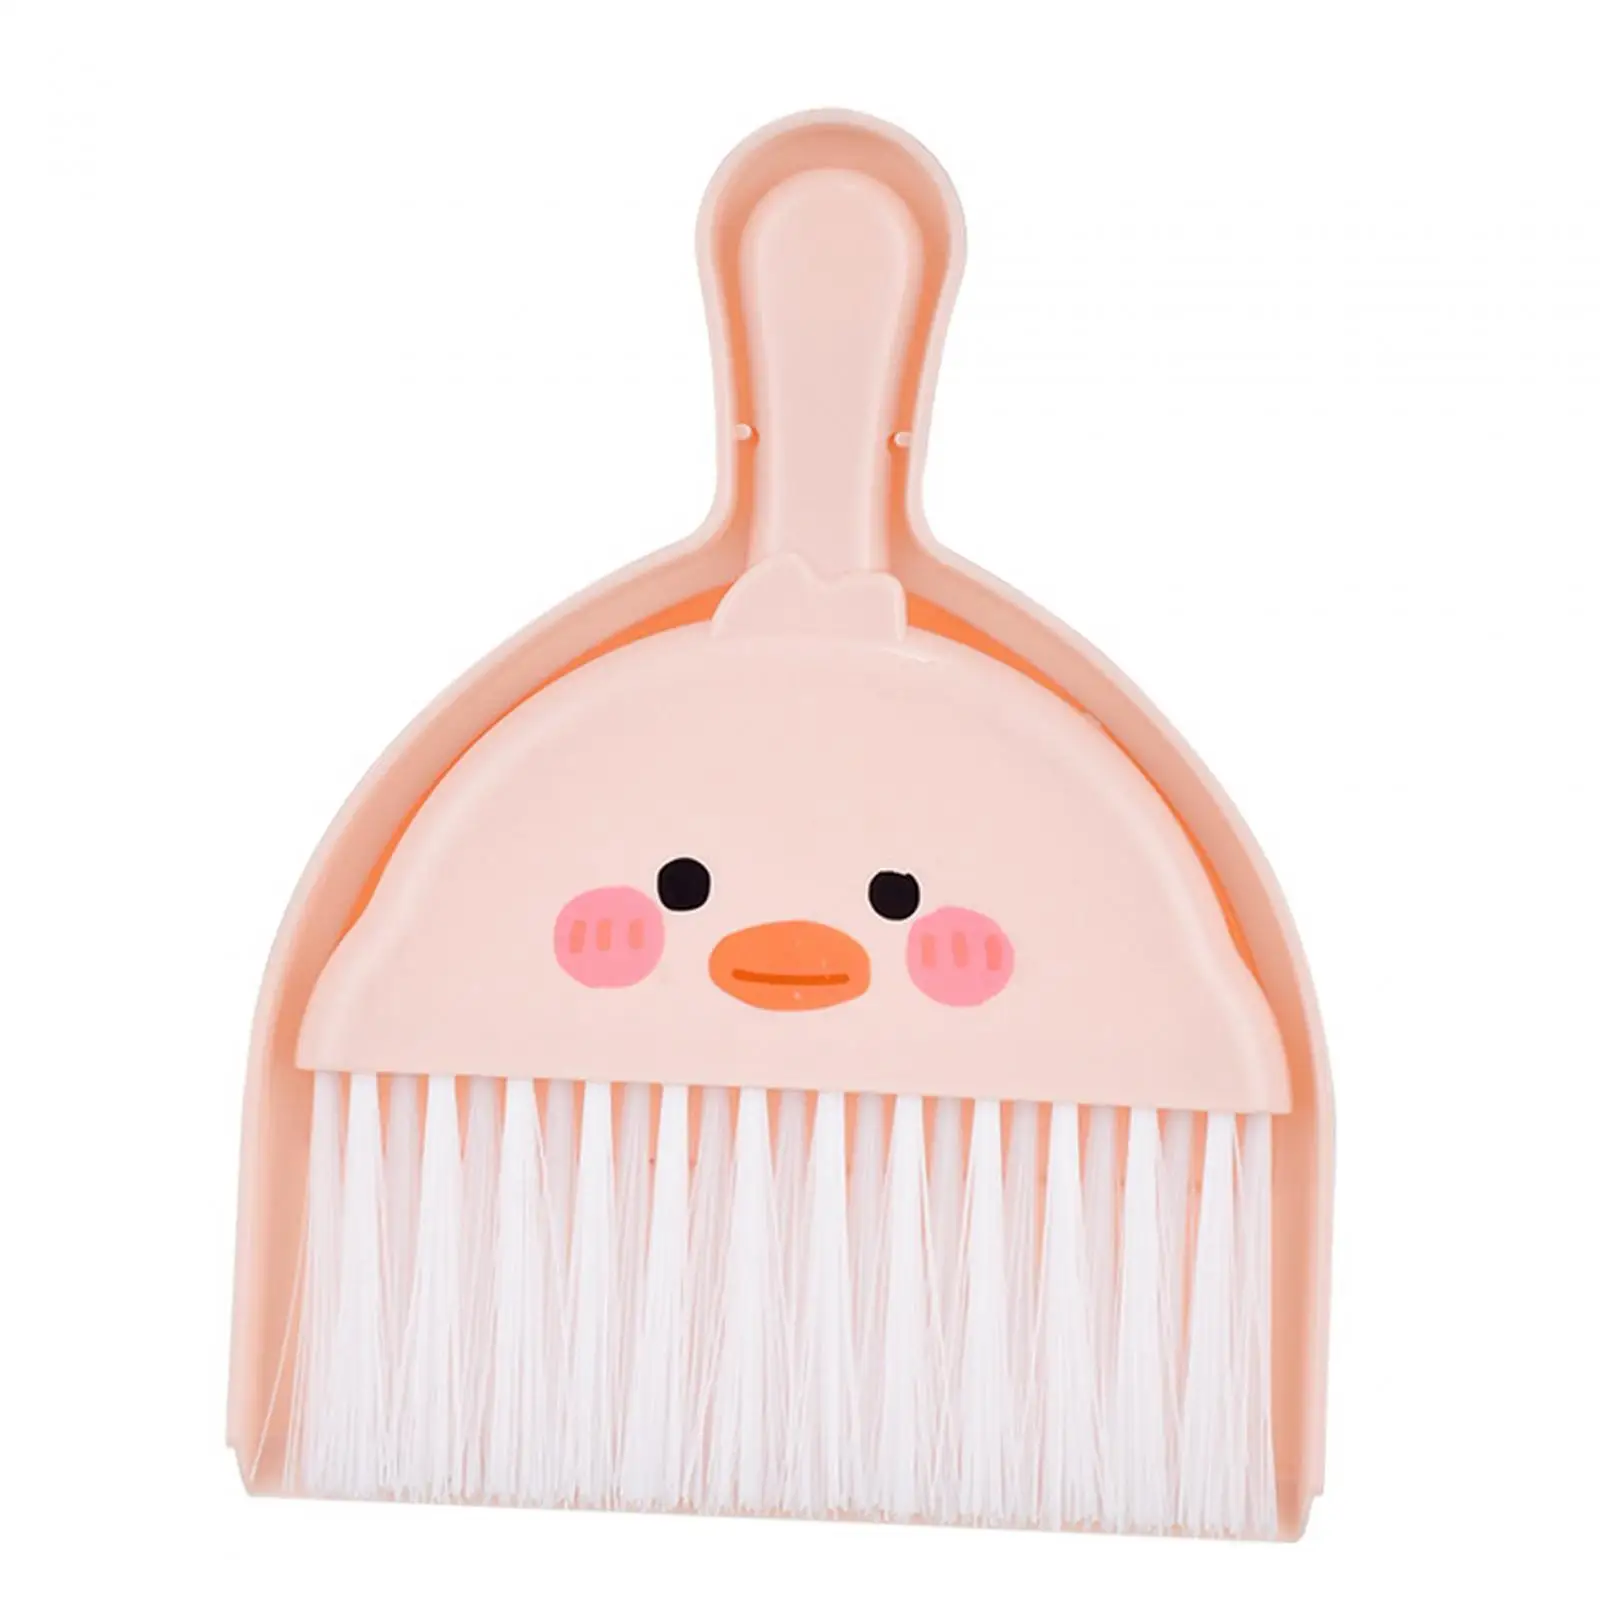 Mini Dustpan and Brush Set, Mini Cleaning Tool Small Broom and Dustpan for Desktop Computer Keyboard Car Window